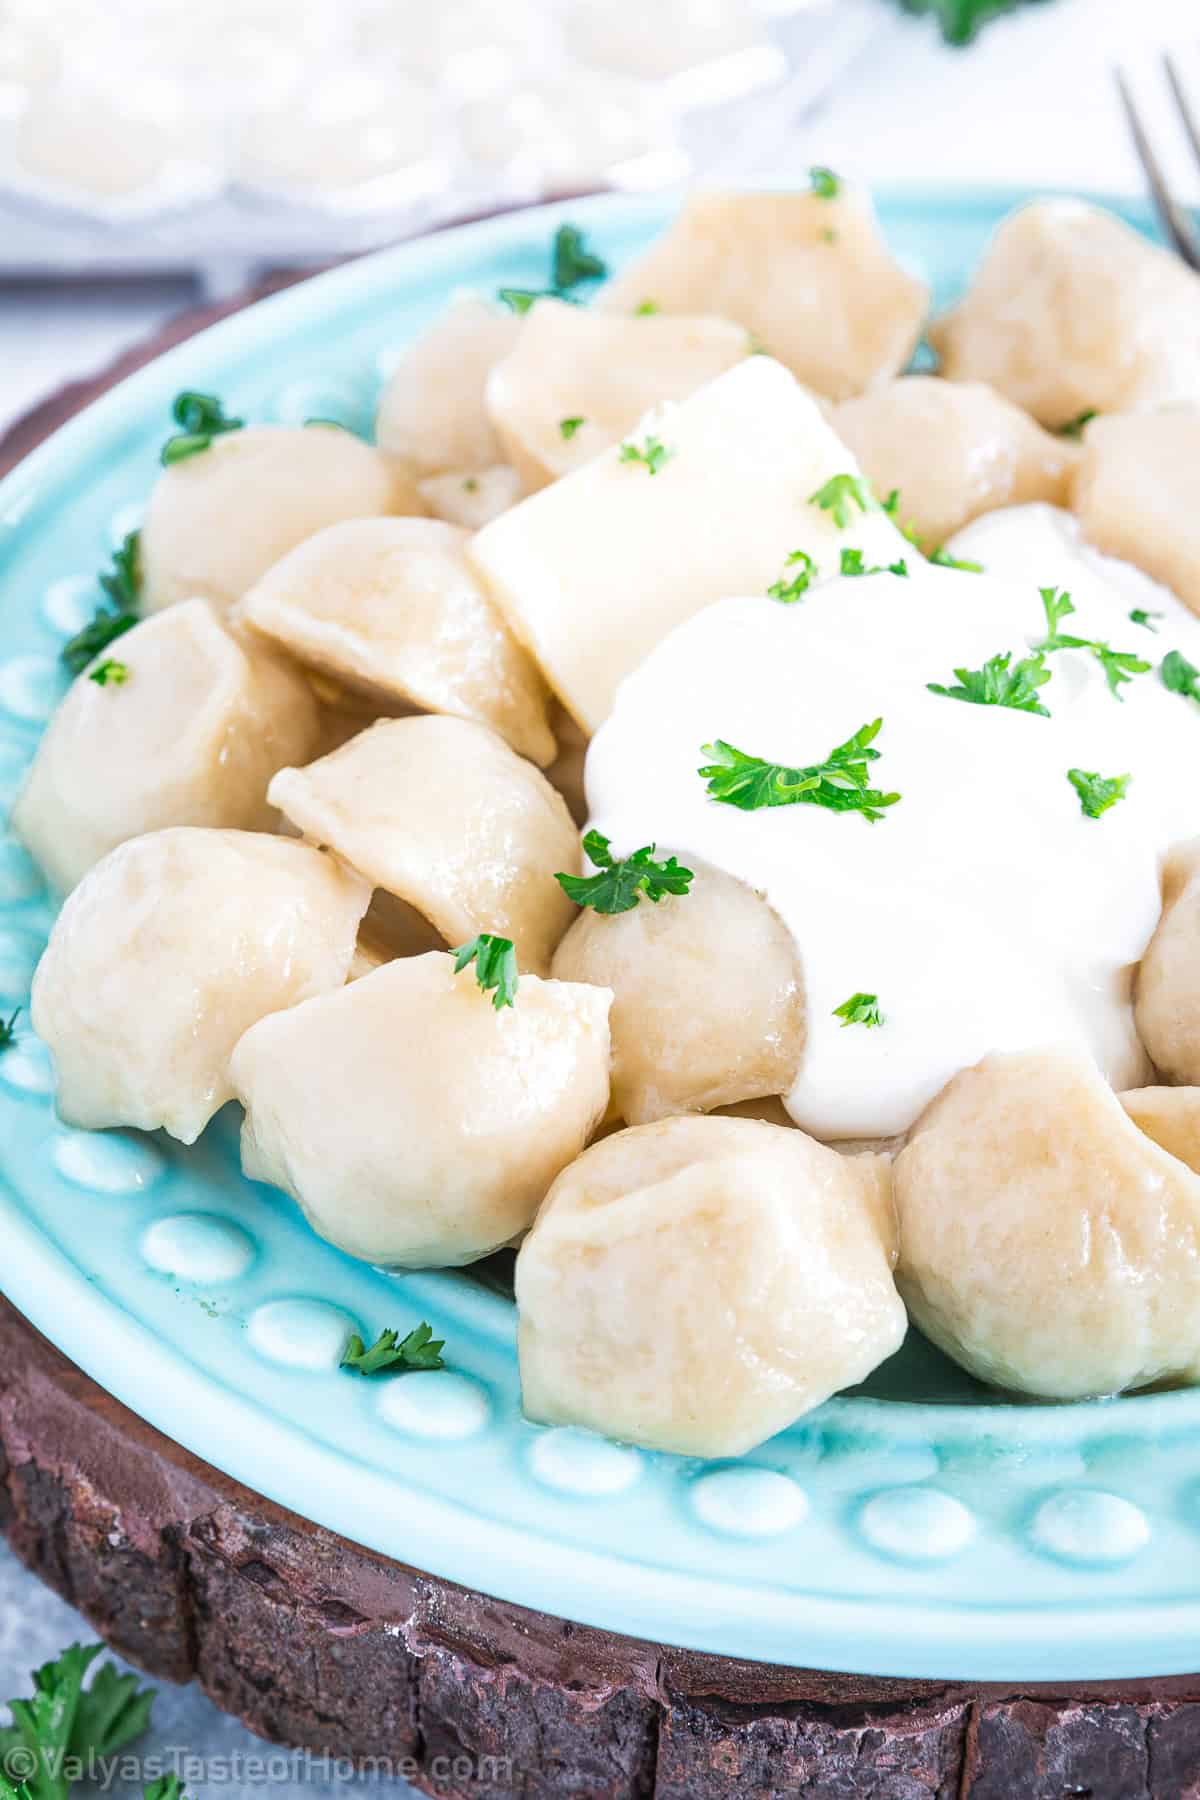 There's something truly satisfying about biting into one of these delicious dumplings, making them a favorite at my table and sure to be a hit at yours, too.